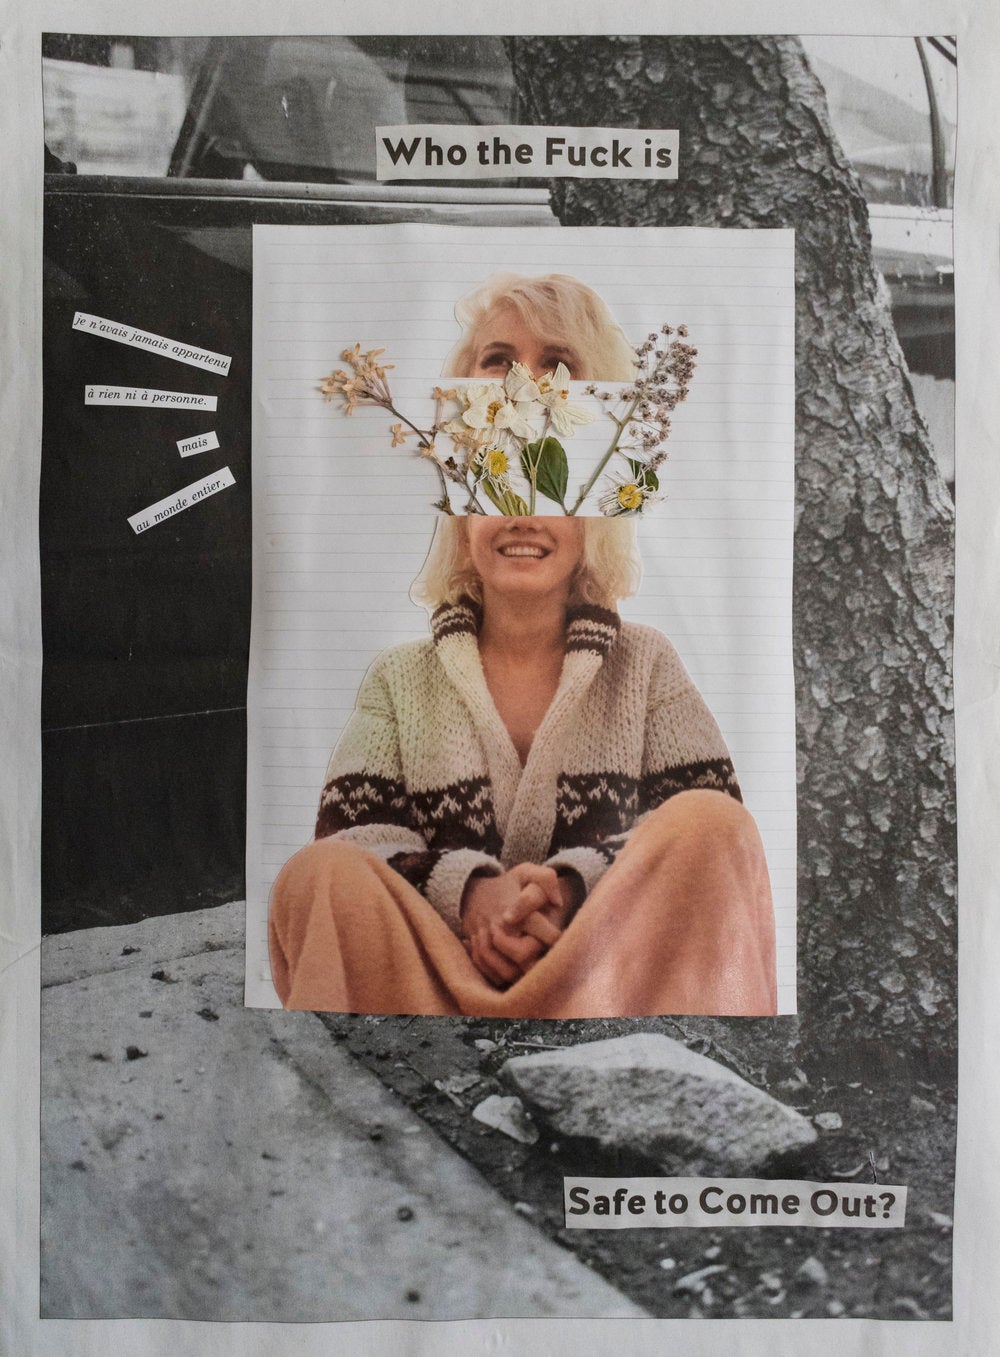 Collage. Woman is sitting; her face is separated into two pieces. Flowers come out of her head. Text reads: "Who the Fuck is" "Safe to Come Out?"